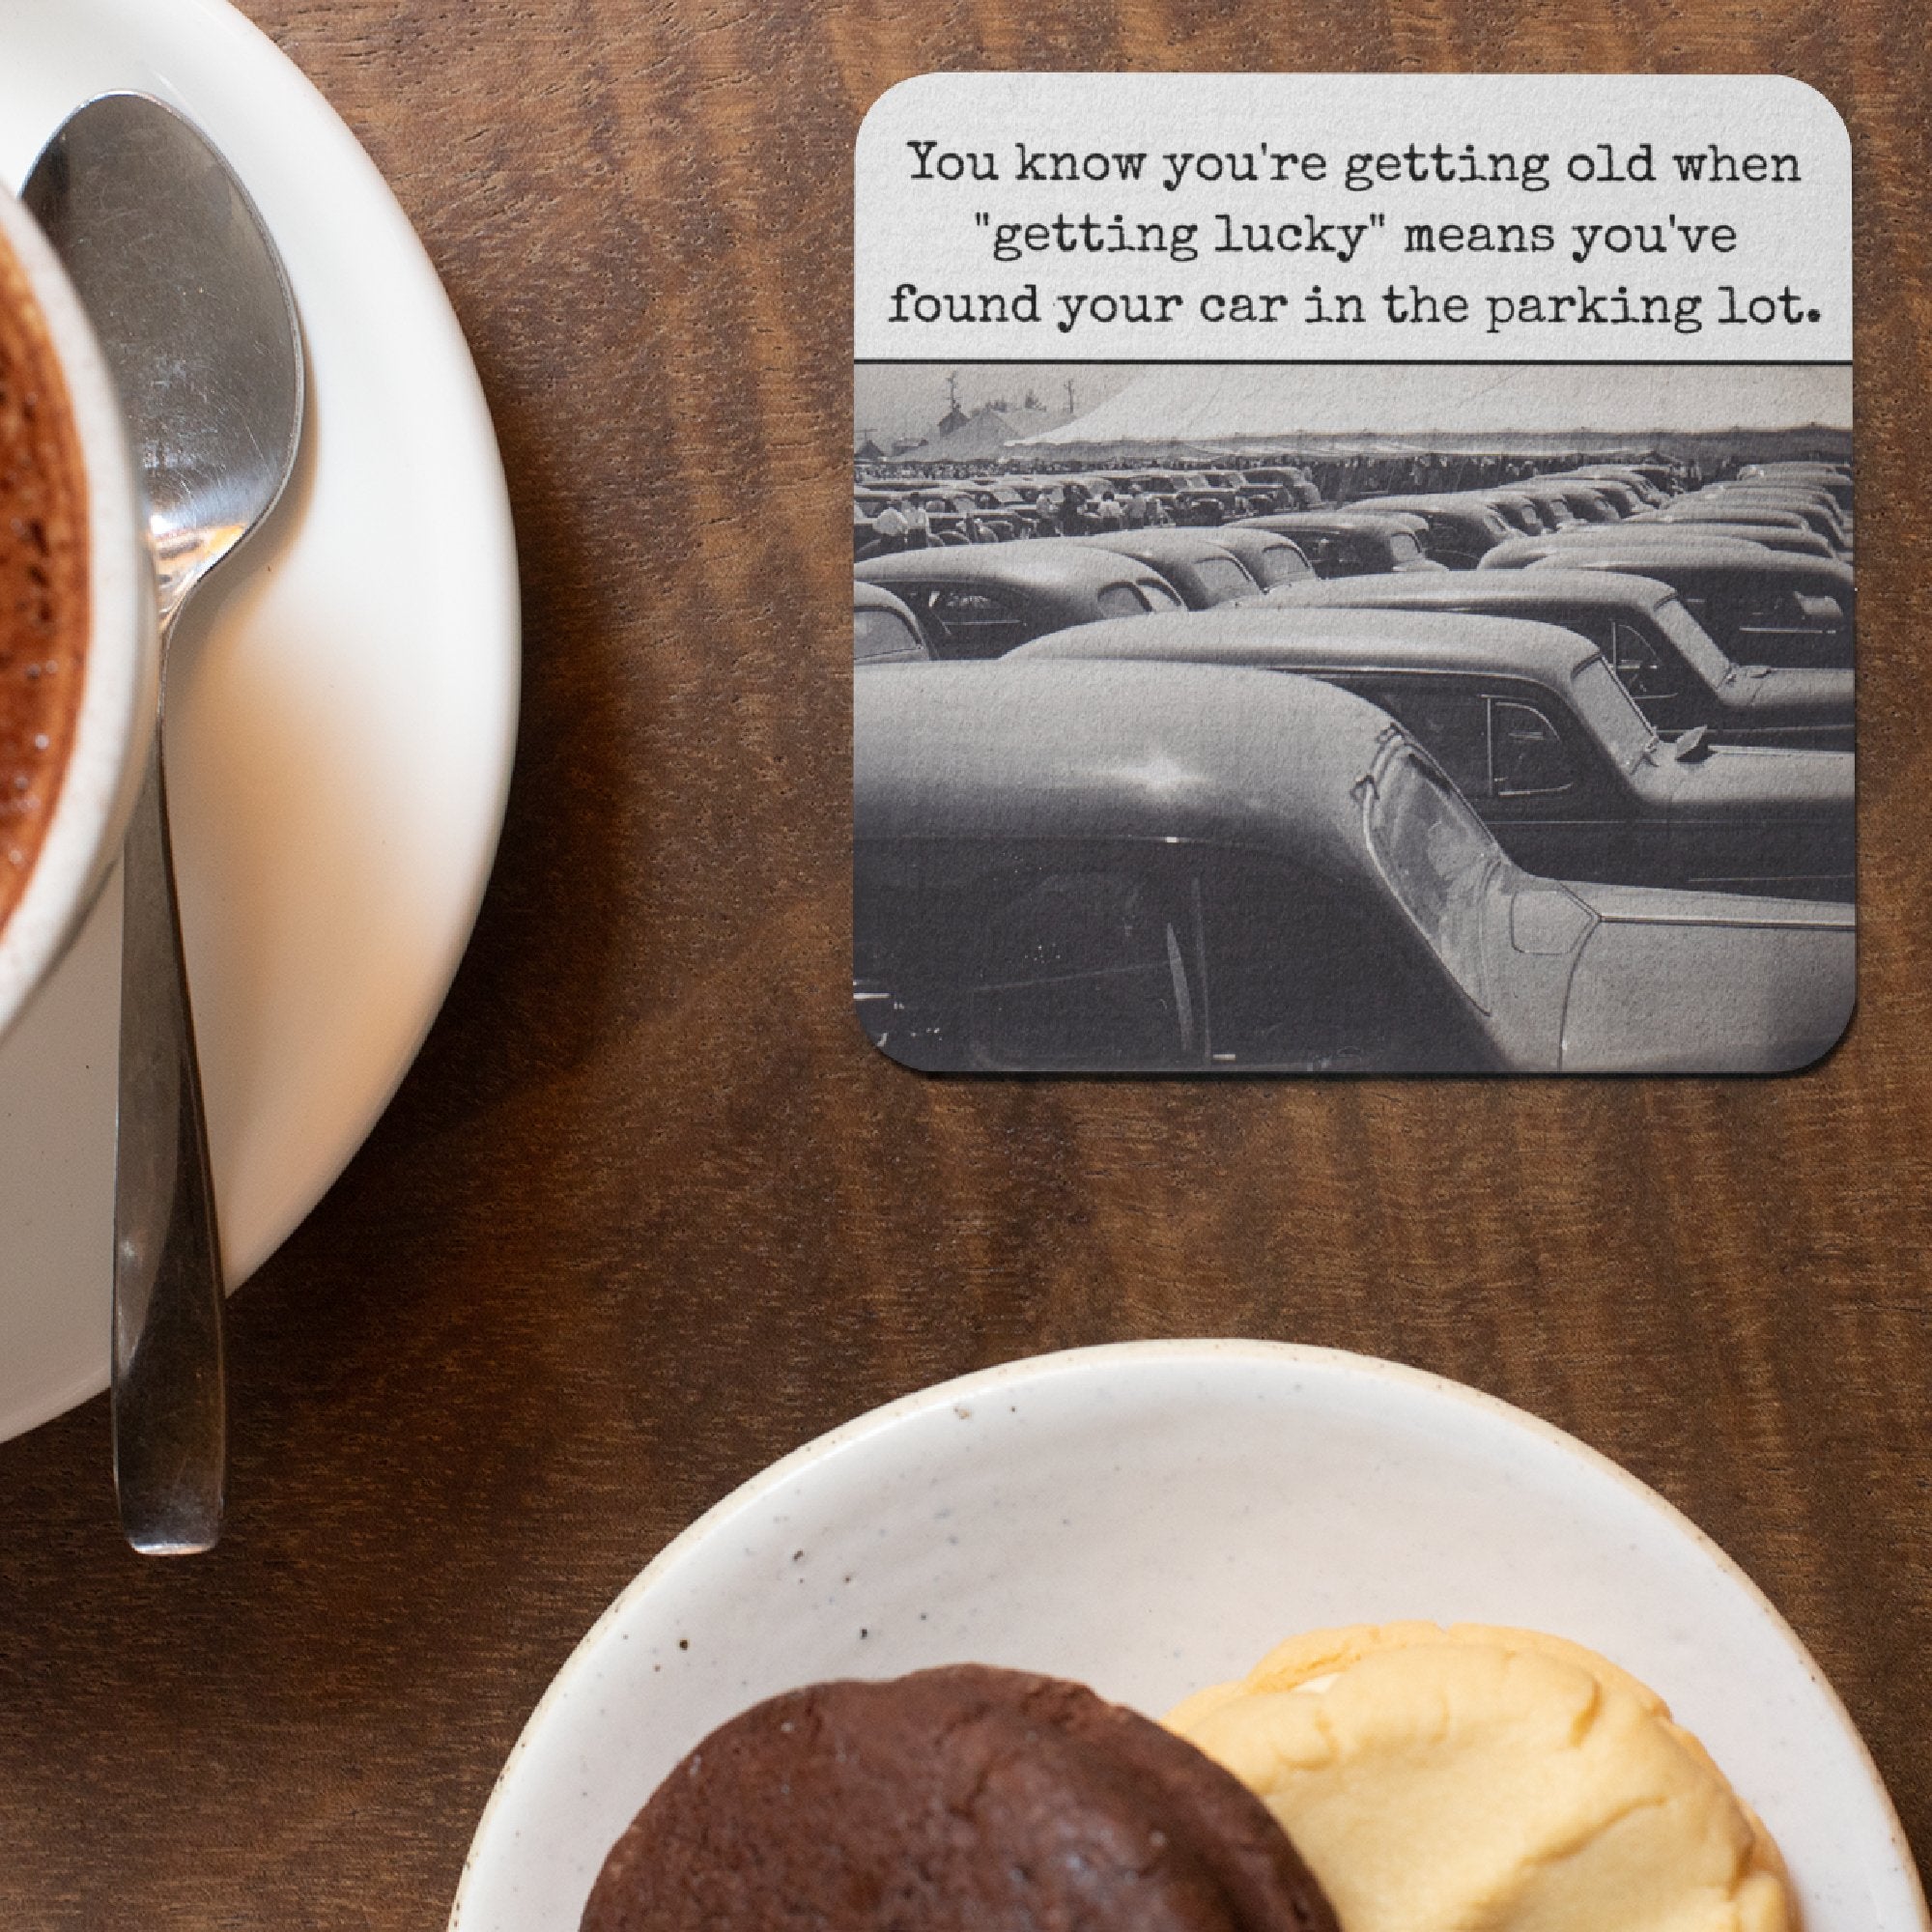 COASTER. "Getting Lucky" Means You've Found Your Car... - My Filosophy